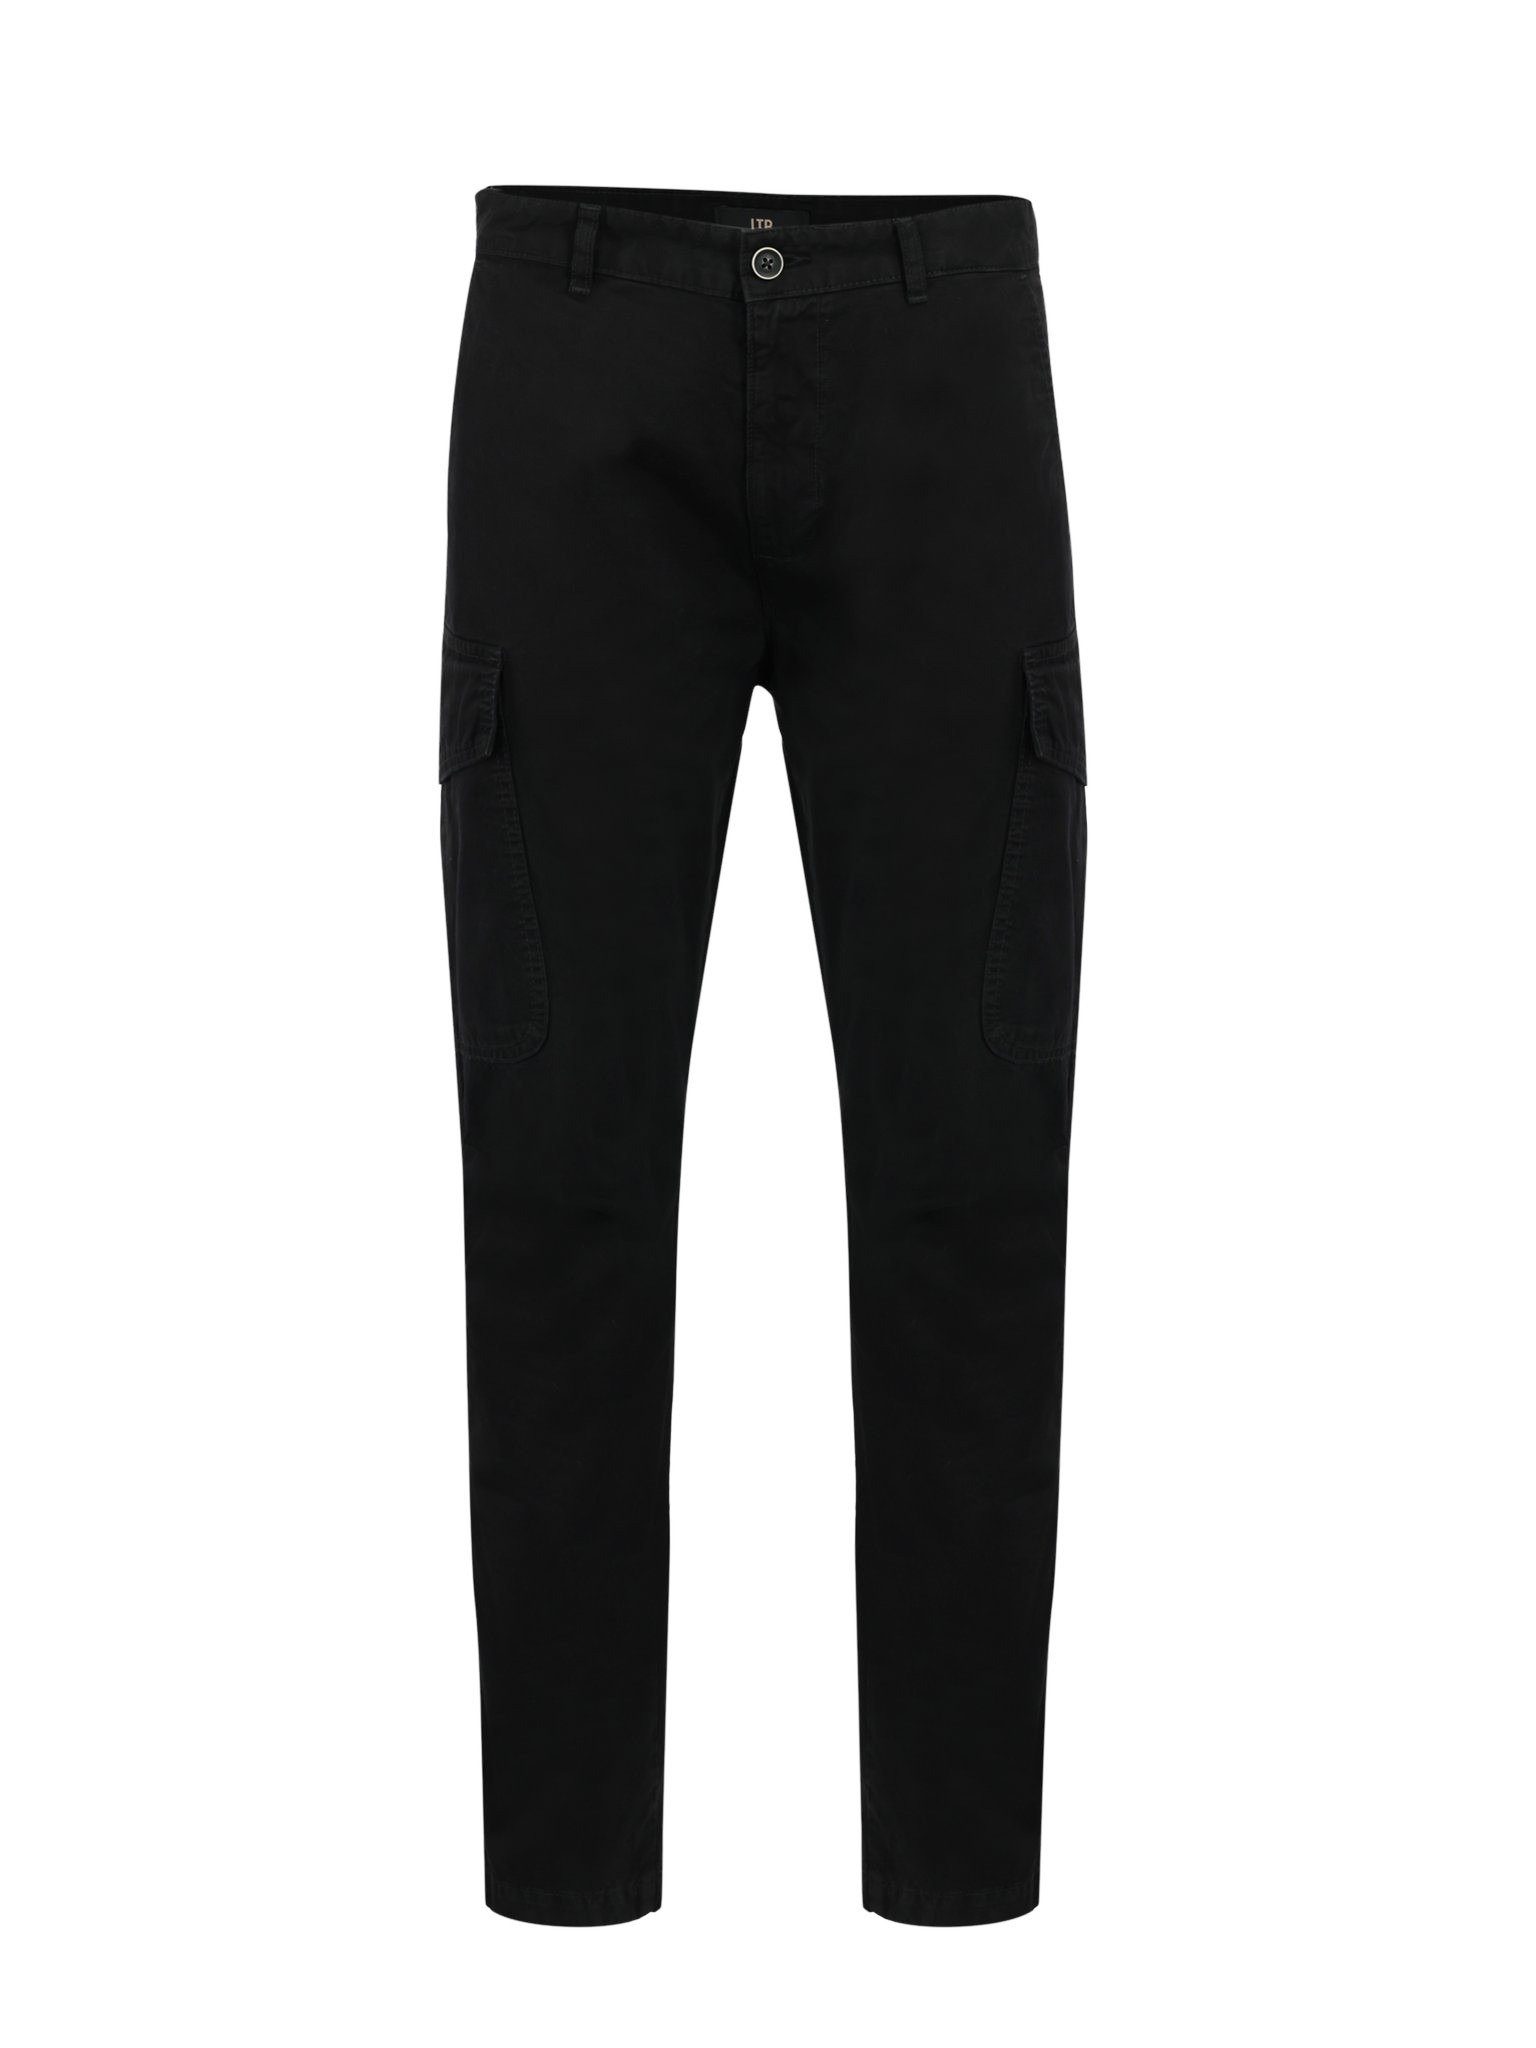 Outdoorhose Wash Black Hopese Pants LTB LTB